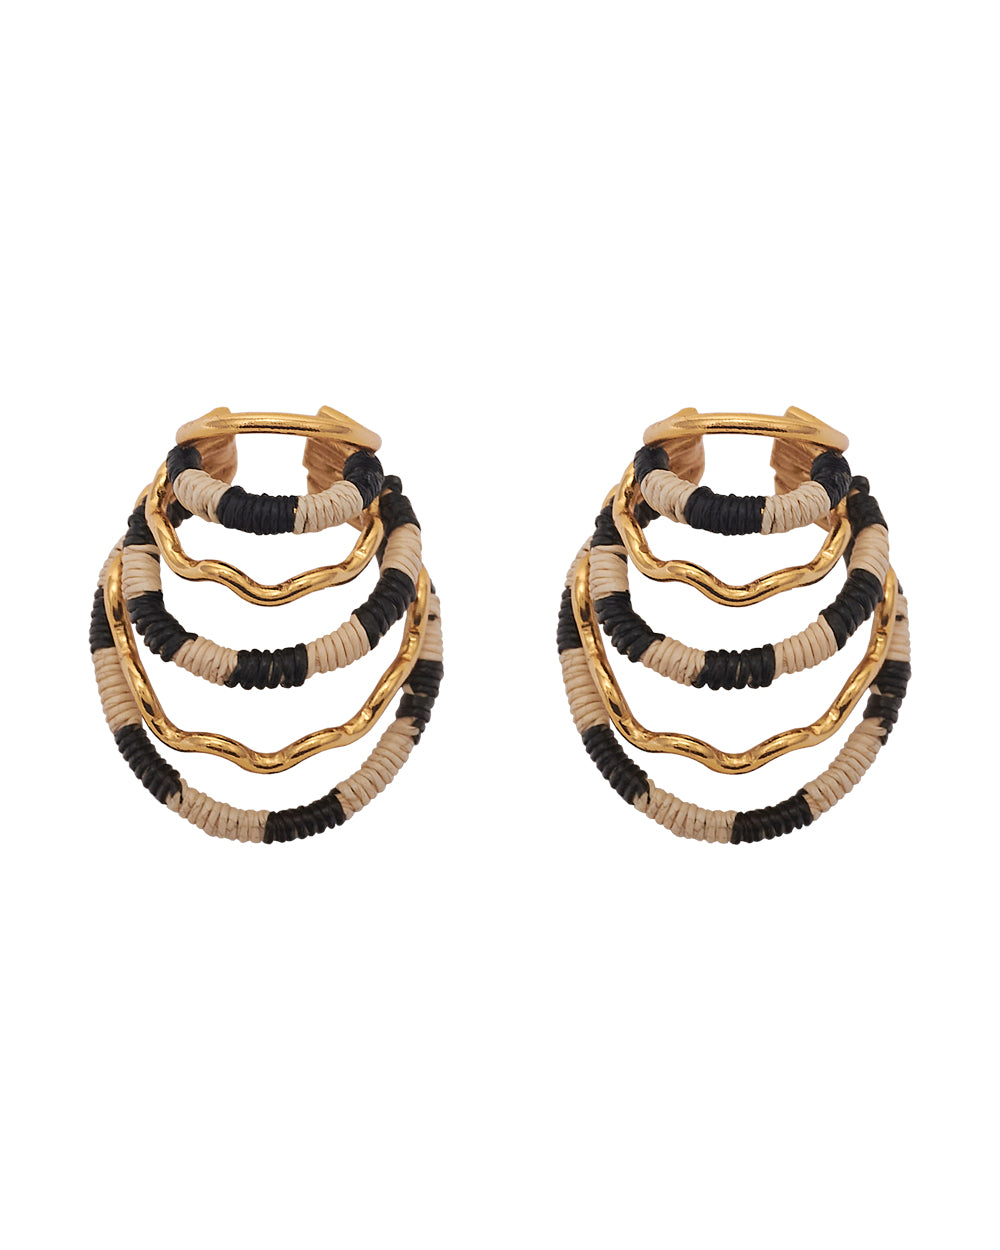 Orbe Maxi Earrings (2 pieces)